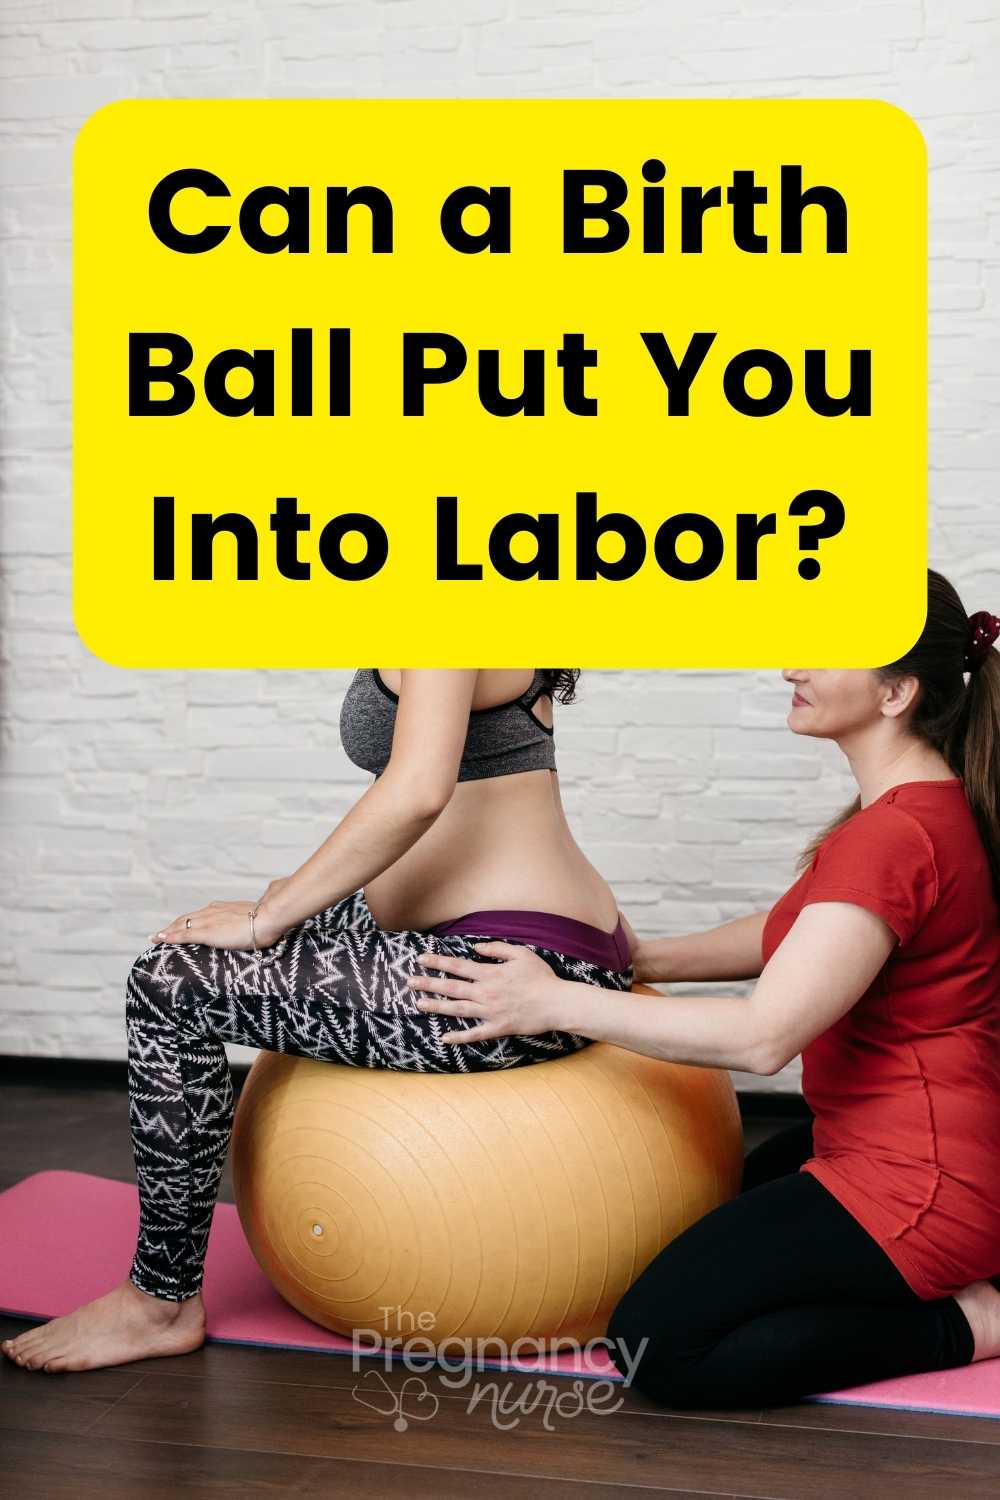 You may wonder how using a birthing call can help you pregnancy and progress in labor. Using a birthing ball (also called exercise ball or yoga ball) can have a lot of benefits!